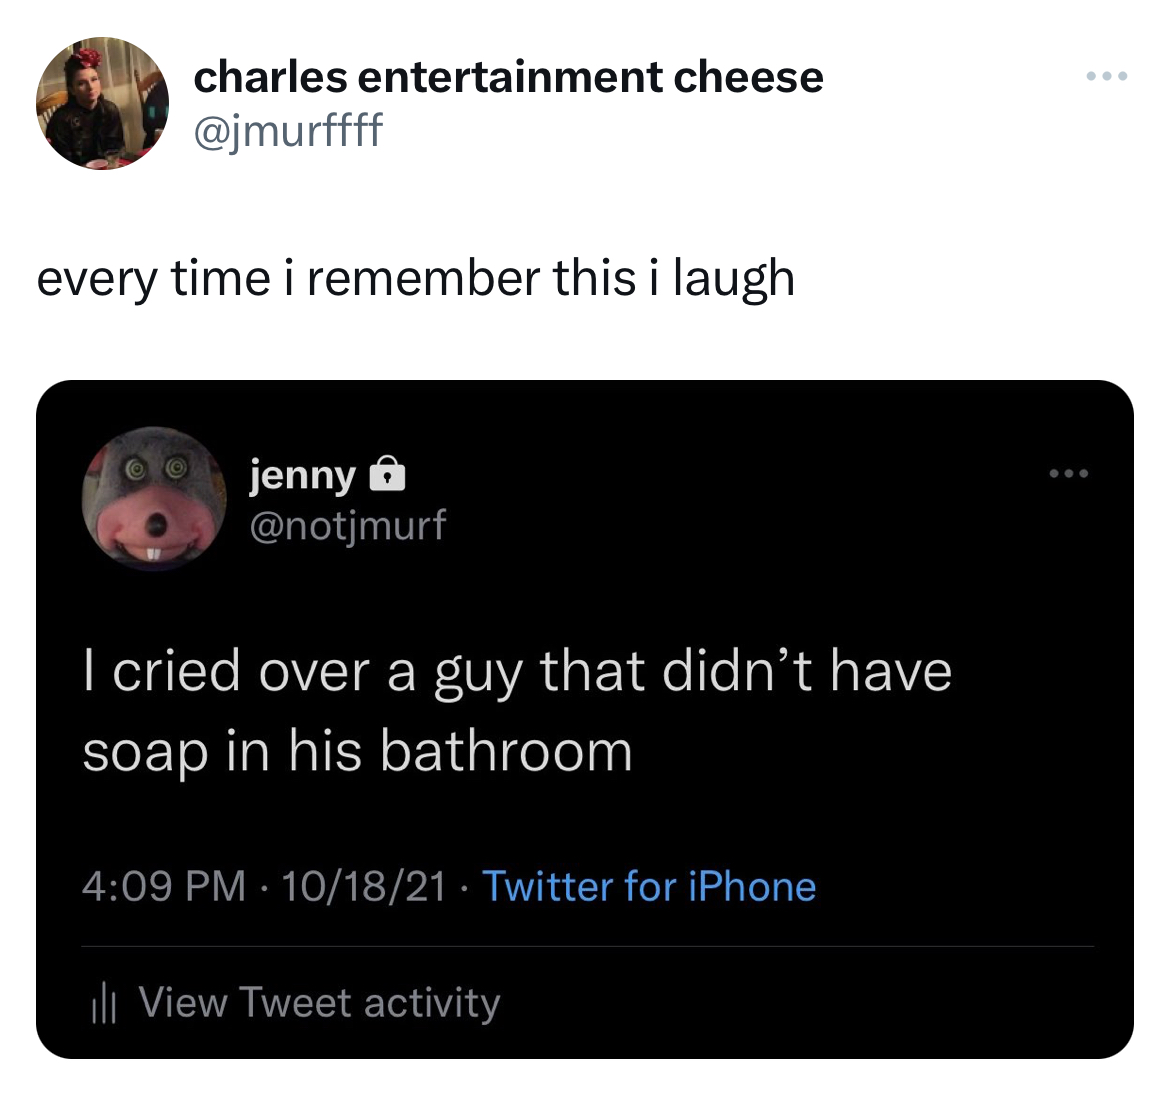 savage tweets - multimedia - charles entertainment cheese every time i remember this i laugh jenny I cried over a guy that didn't have soap in his bathroom 101821 Twitter for iPhone View Tweet activity